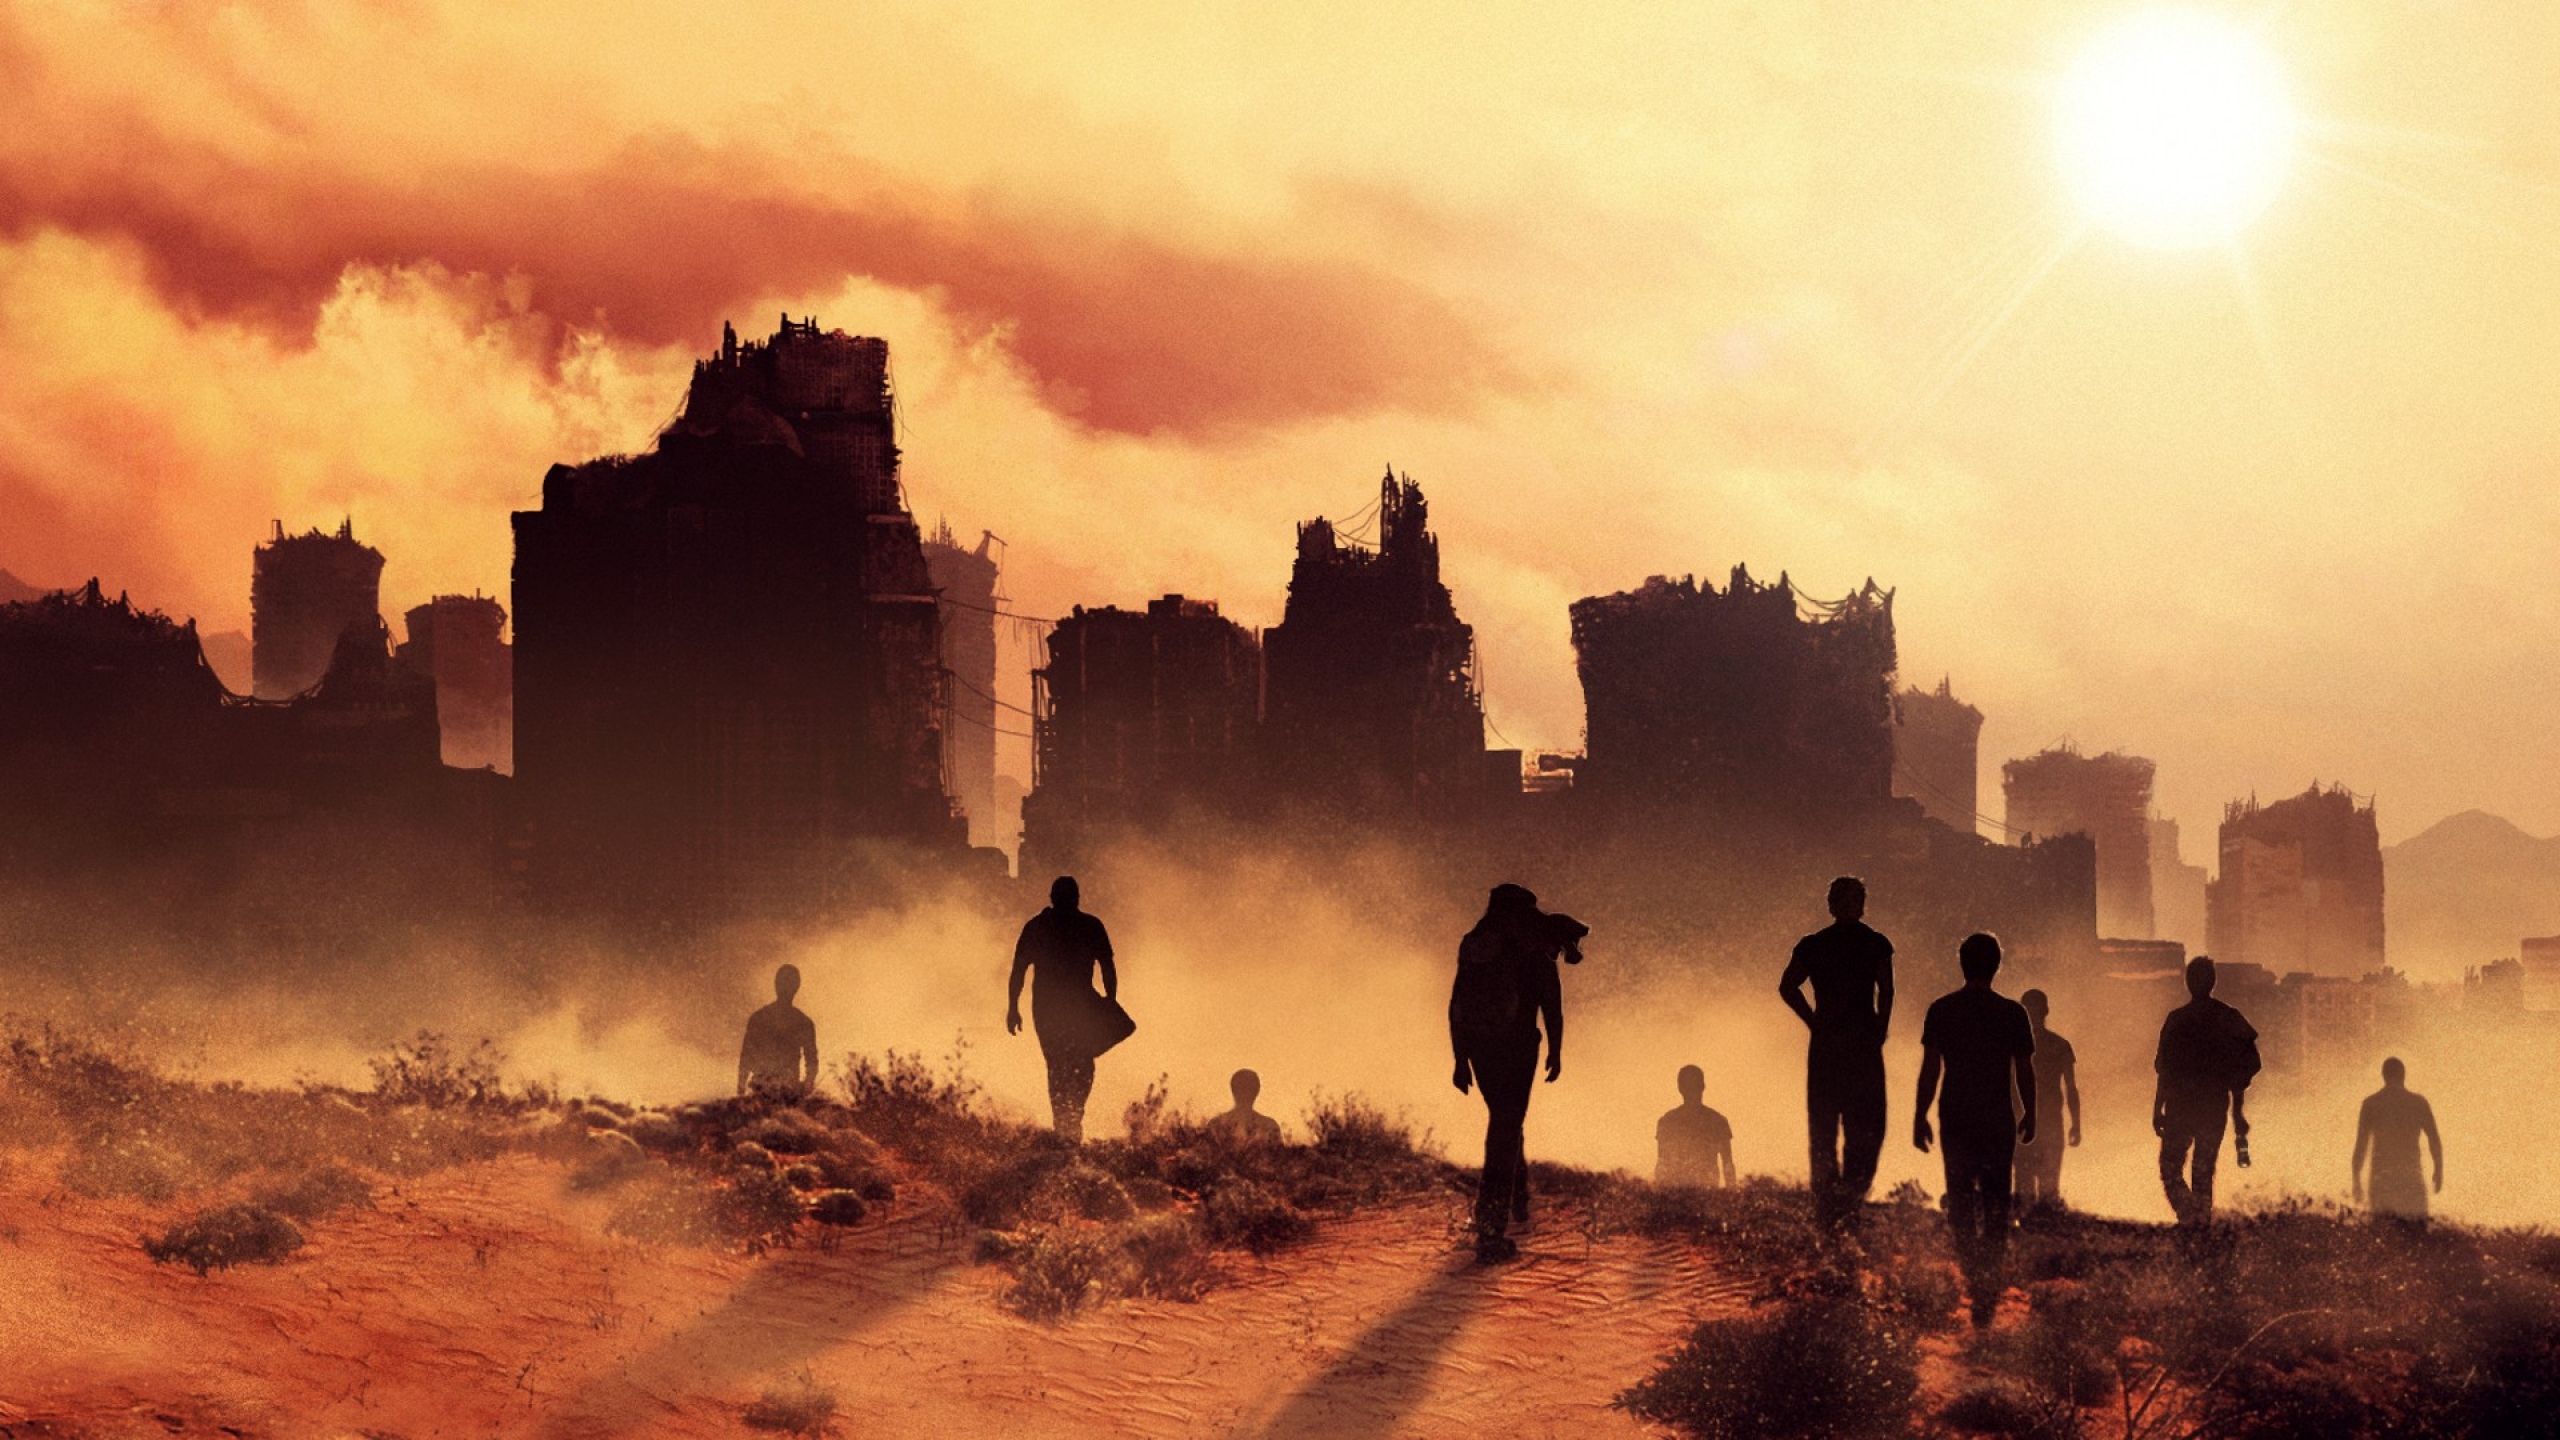 Maze Runner The Scorch Trials Silhouettes for 2560x1440 HDTV resolution